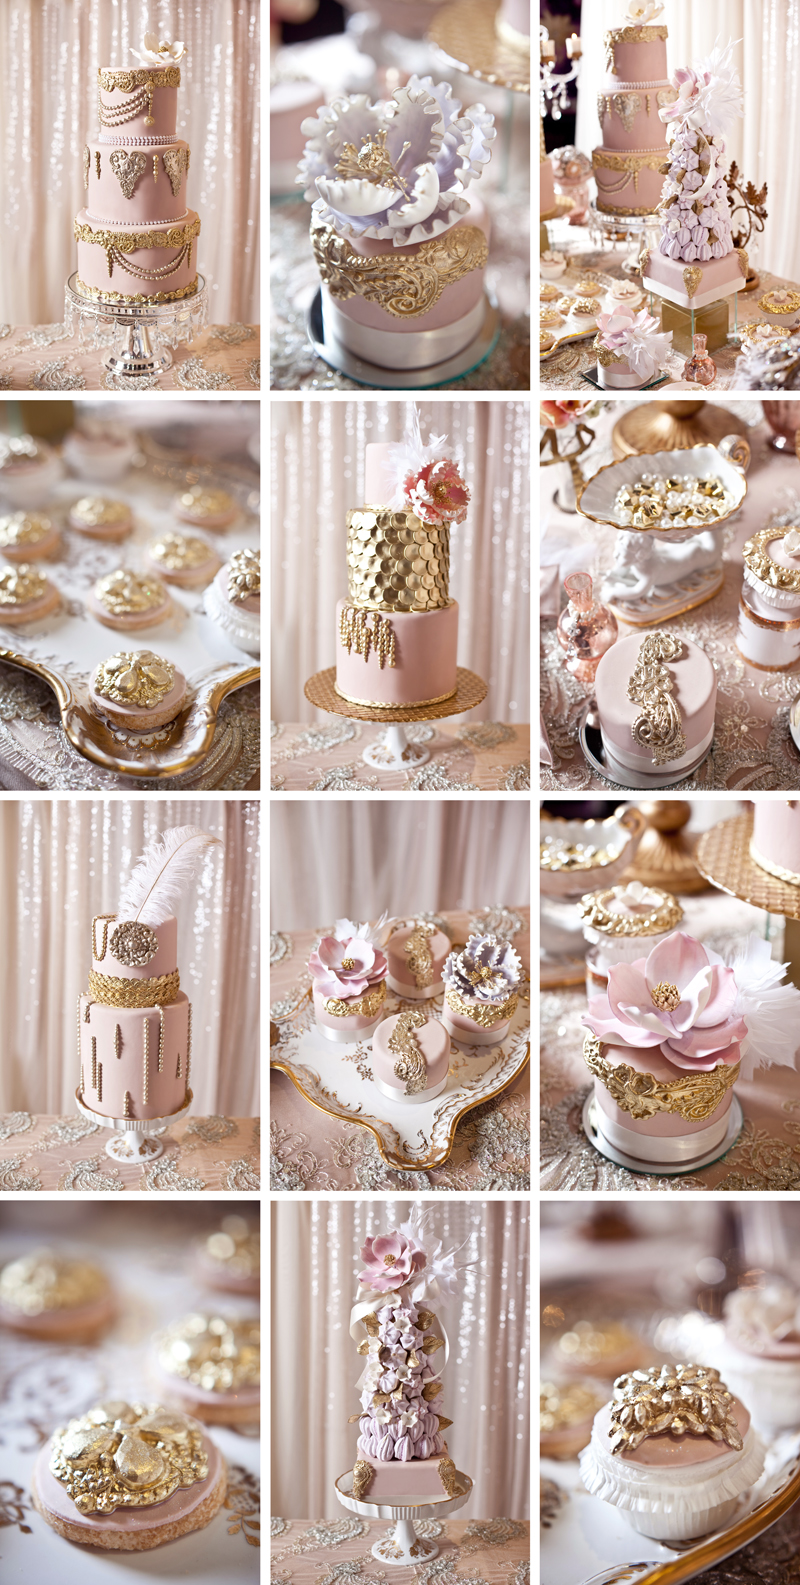 pink and gold wedding cake scape, luxury wedding cakes, as seen in grace ormond wedding style